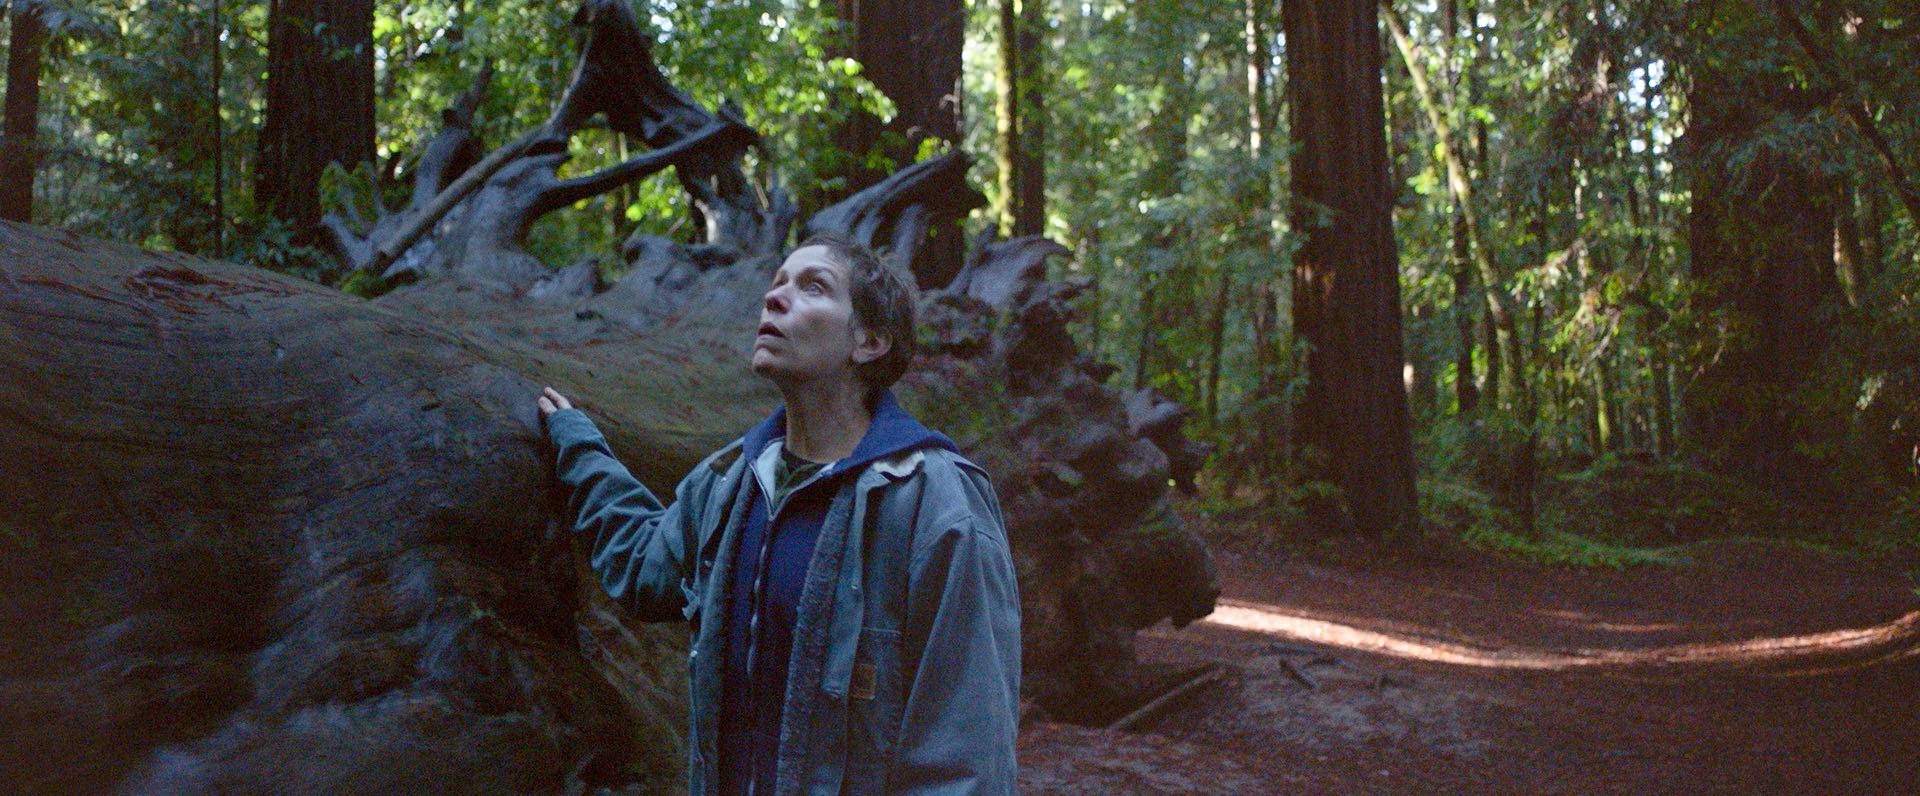 A still image from the film “Nomadland” shows Frances McDormand wandering in the forest. (Searchlight Pictures via AP)